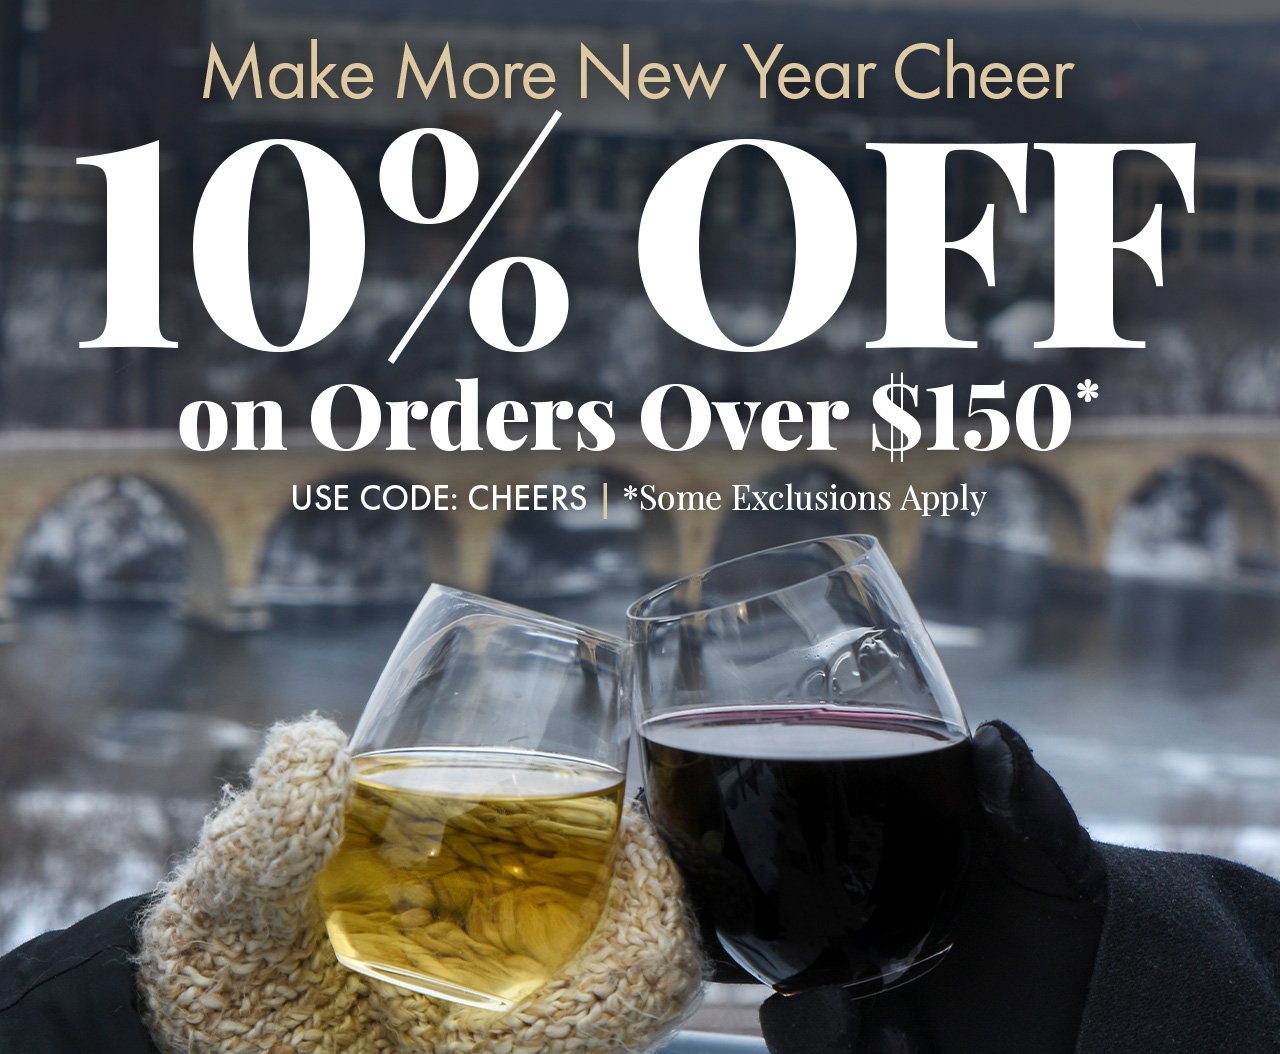 Make More New Year Cheer Save 10% Off Sitewide Enter Code: CHEERS